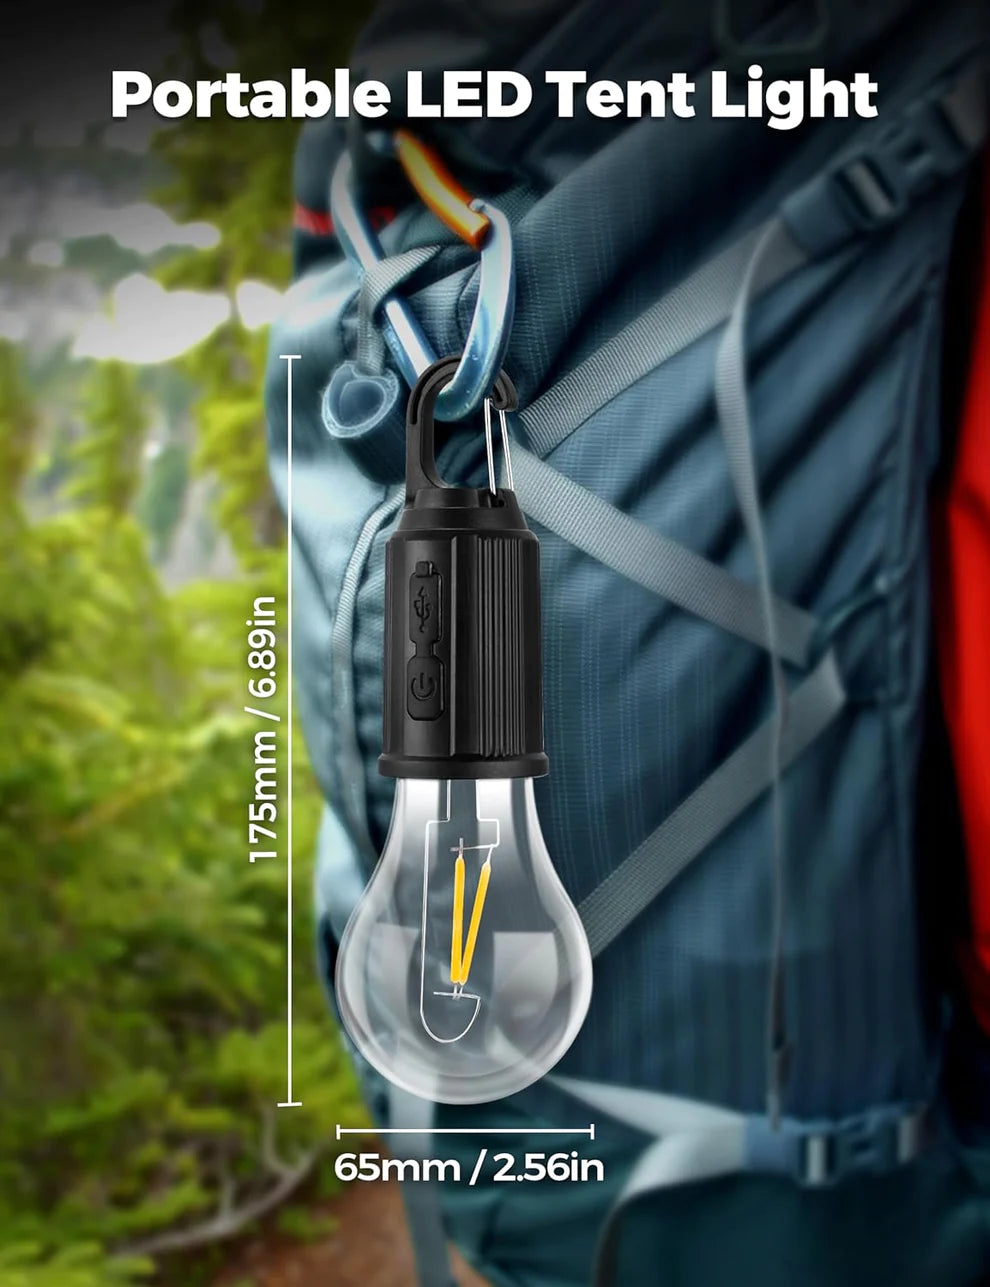 Rechargeable Bulb With Hook